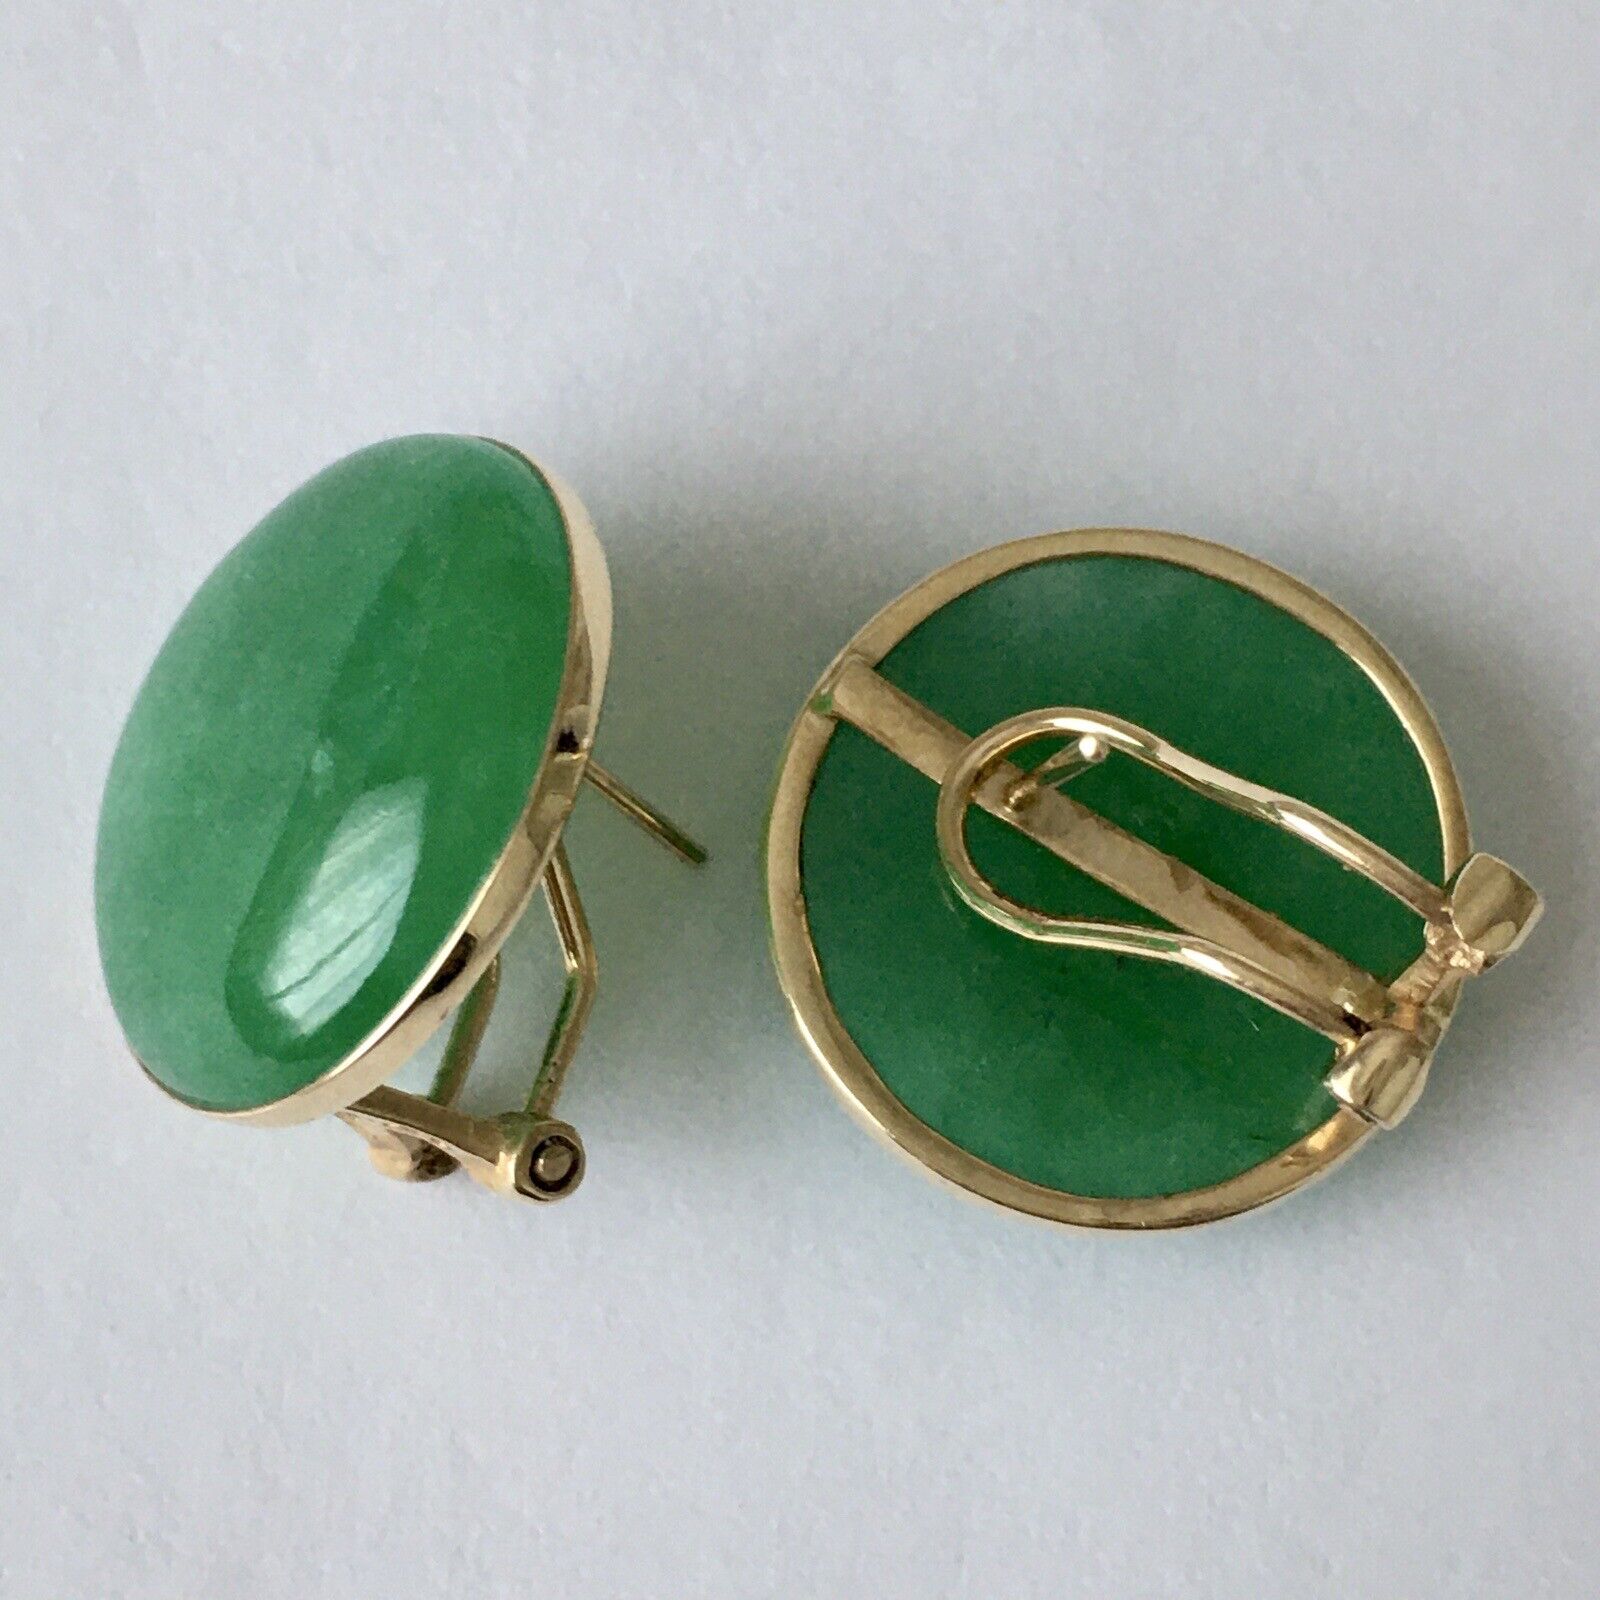 New 14k Solid Yellow Gold Natural Green Jade Earrings Good Luck 18mm French  Clip, gemstone women's jewelry gift – S & L Trade Inc.